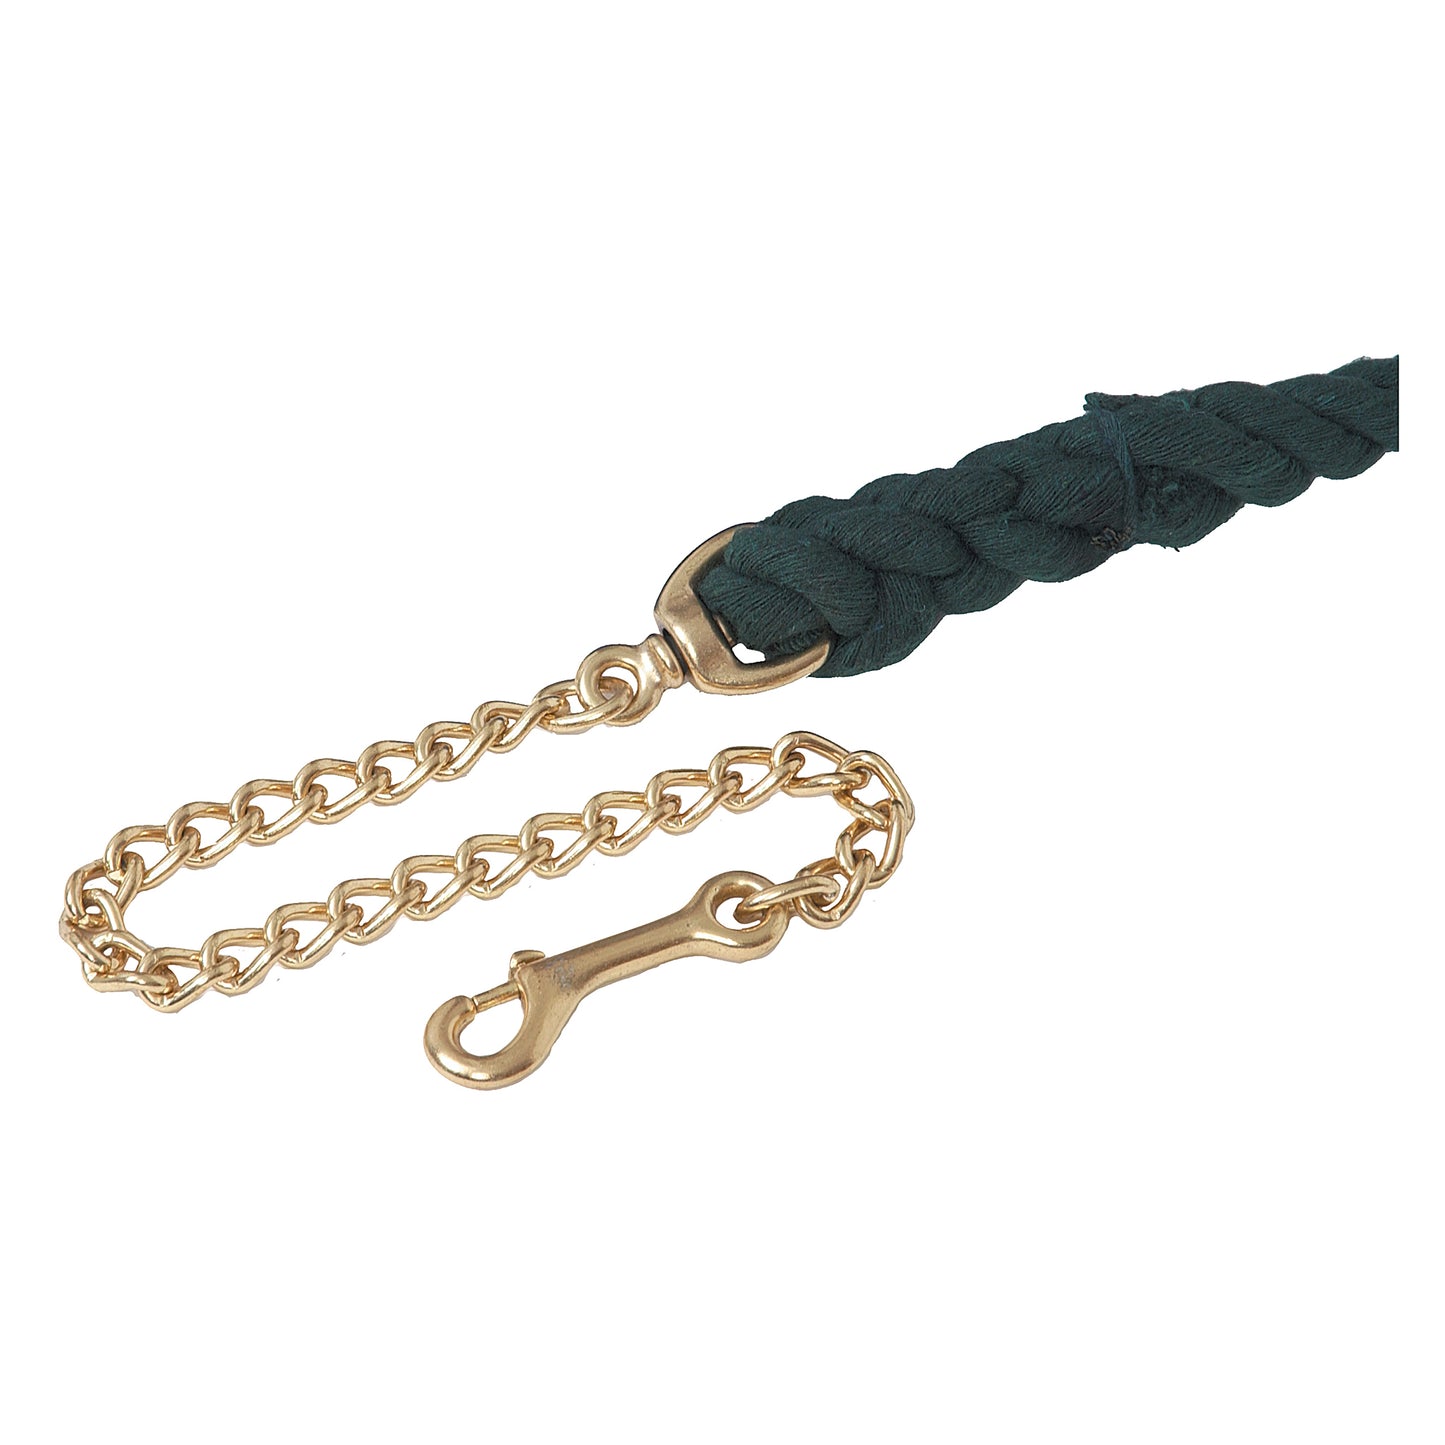 3/4" Thick Colored Cotton Leads with Swivel Chain